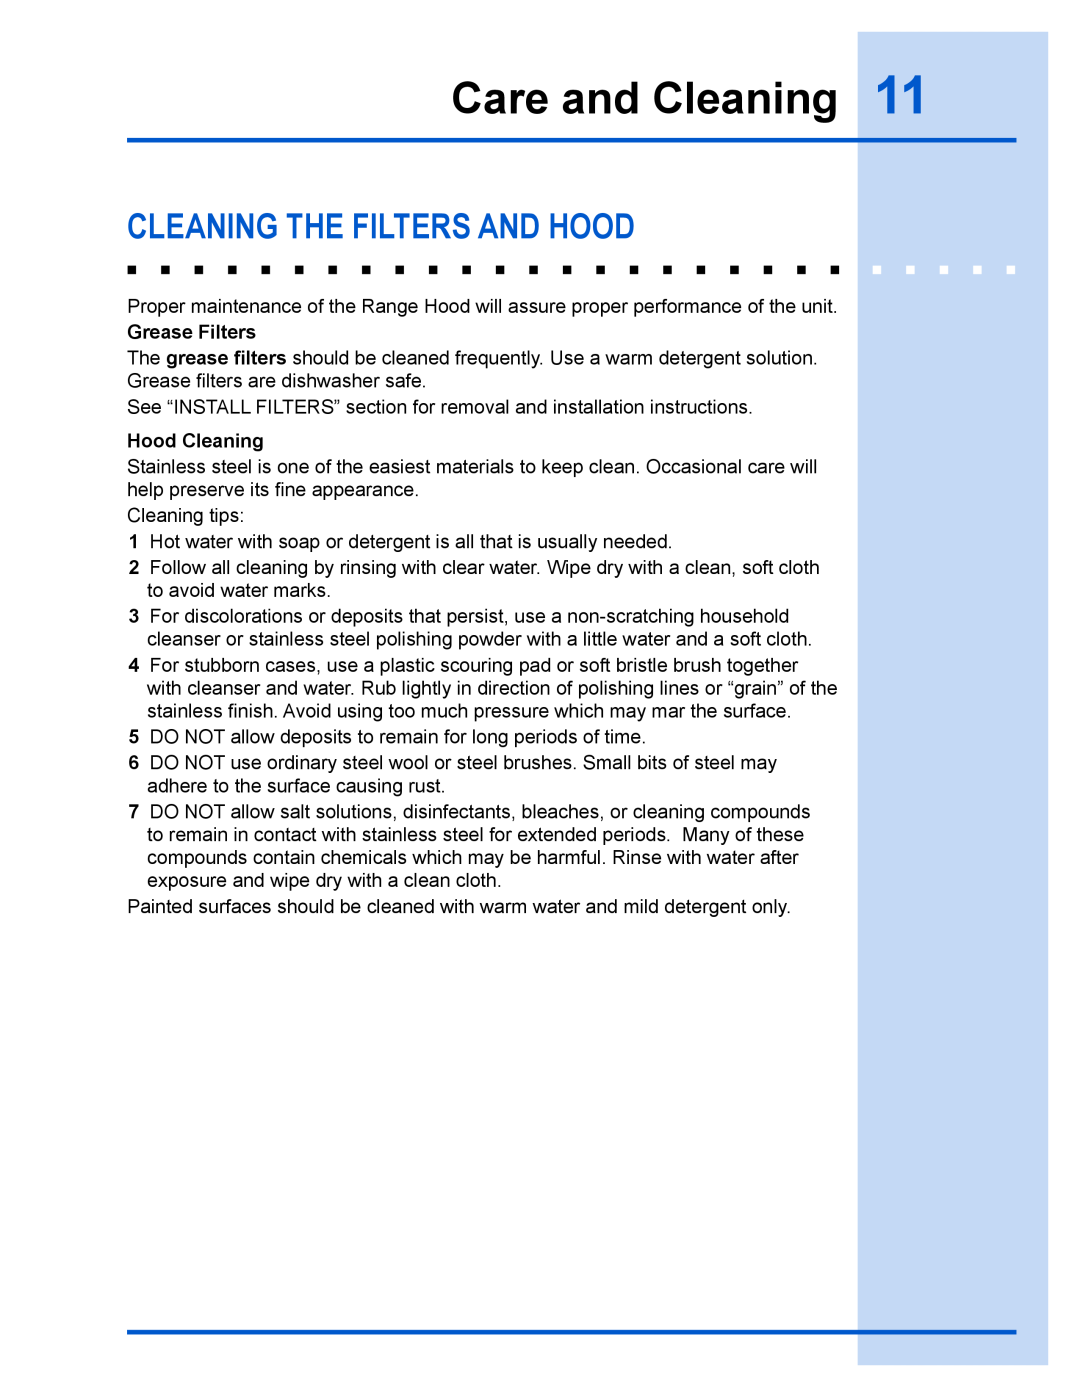 Electrolux E40PV100FS installation instructions Care and Cleaning, Cleaning The Filters And Hood 